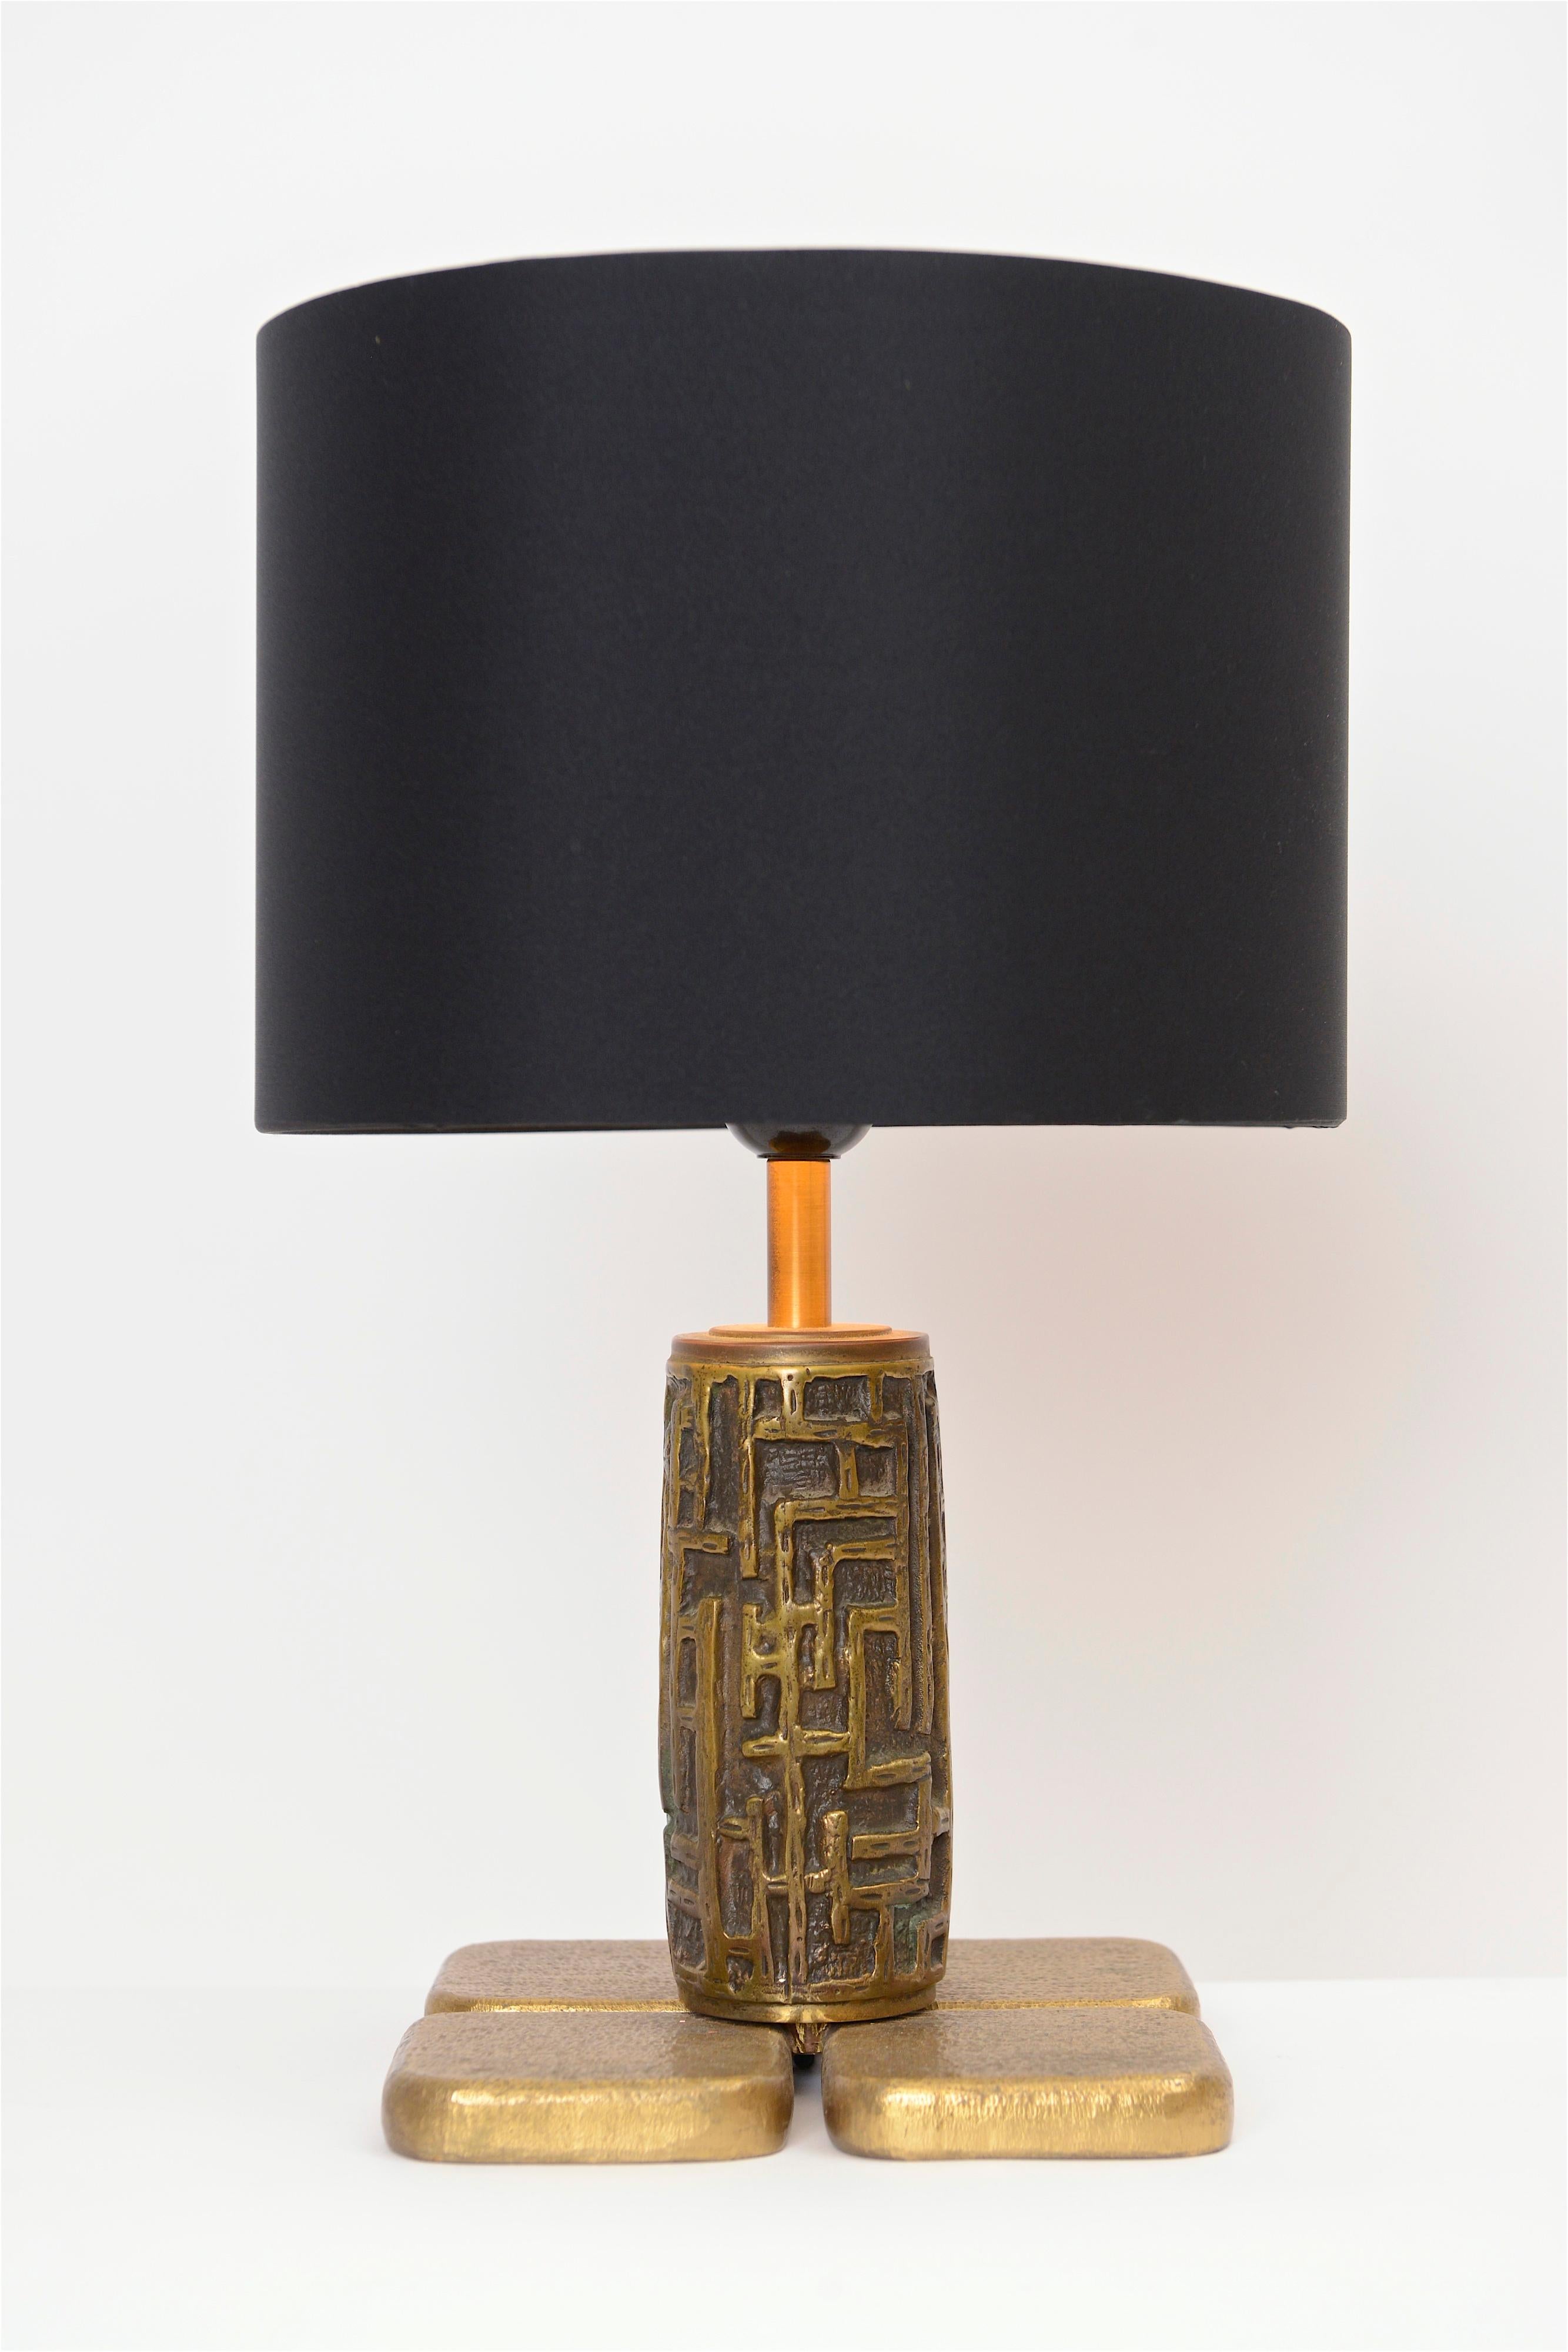 Italian Pair of Midcentury Bronze Table Lamps by Luciano Frigerio, circa 1960